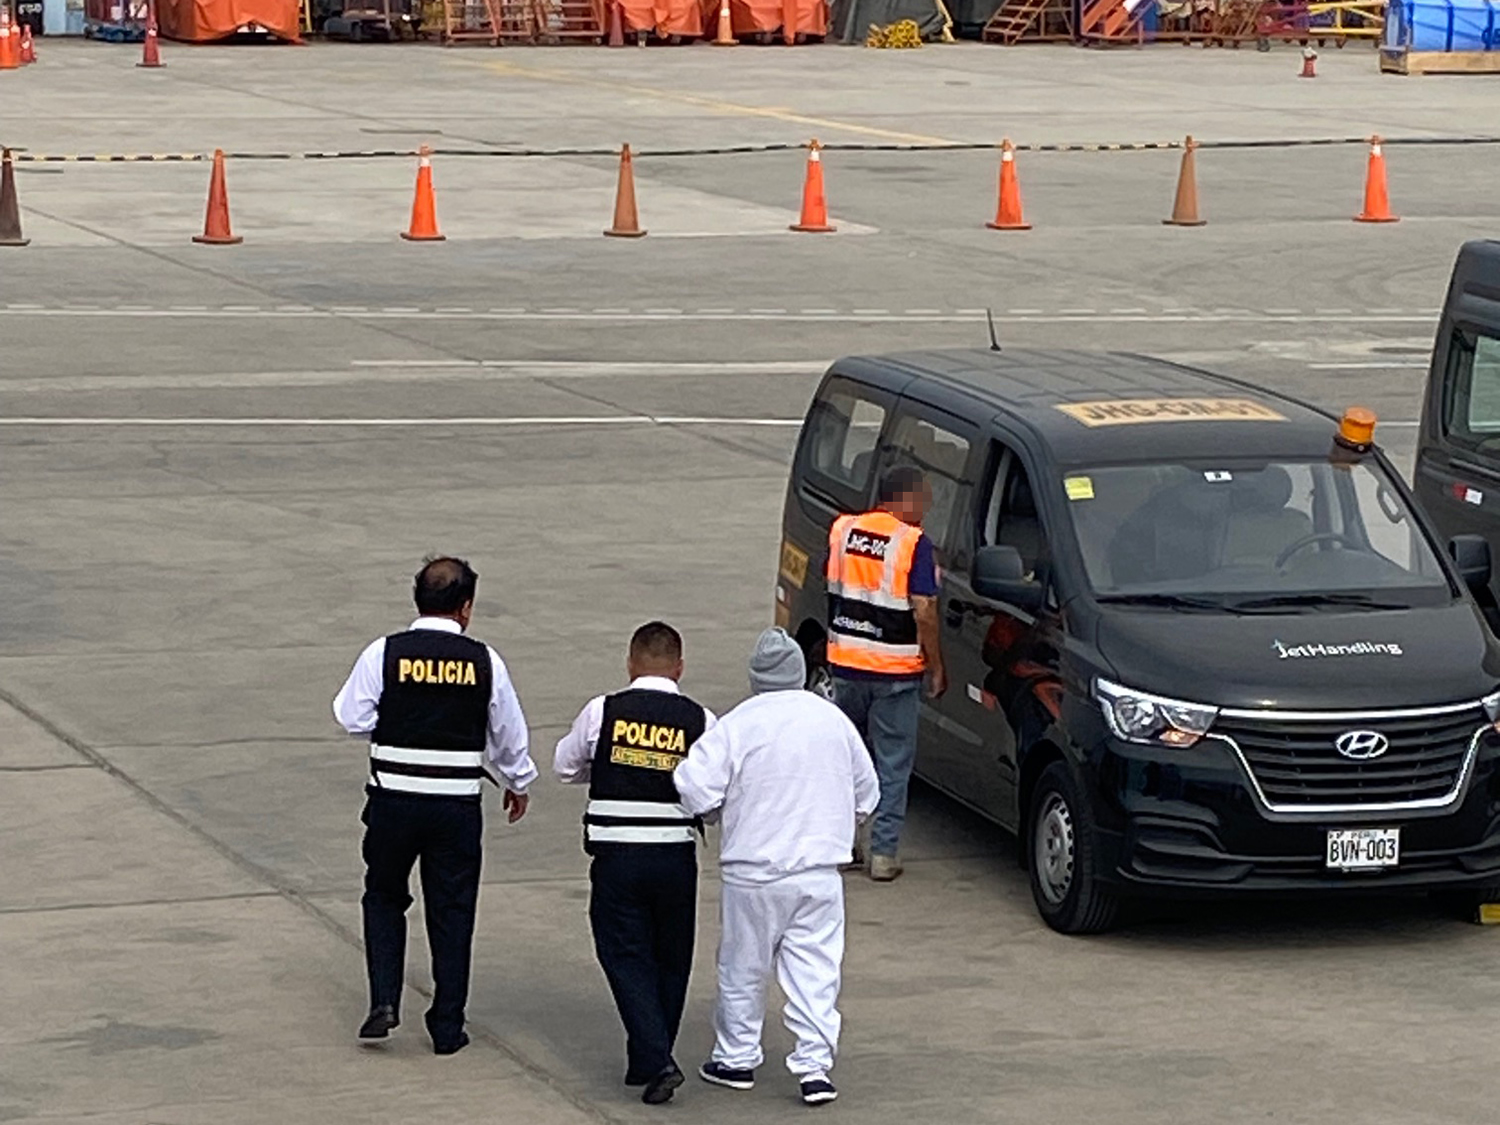 ERO San Diego deportation officers escorted Giovani Danti Gamarra-Puertas, 63, aboard an ICE Air Operations charter flight to Lima, Peru, where they transferred custody of the foreign fugitive to Peruvian authorities at the Jorge Chavez International Airport, Dec. 29.